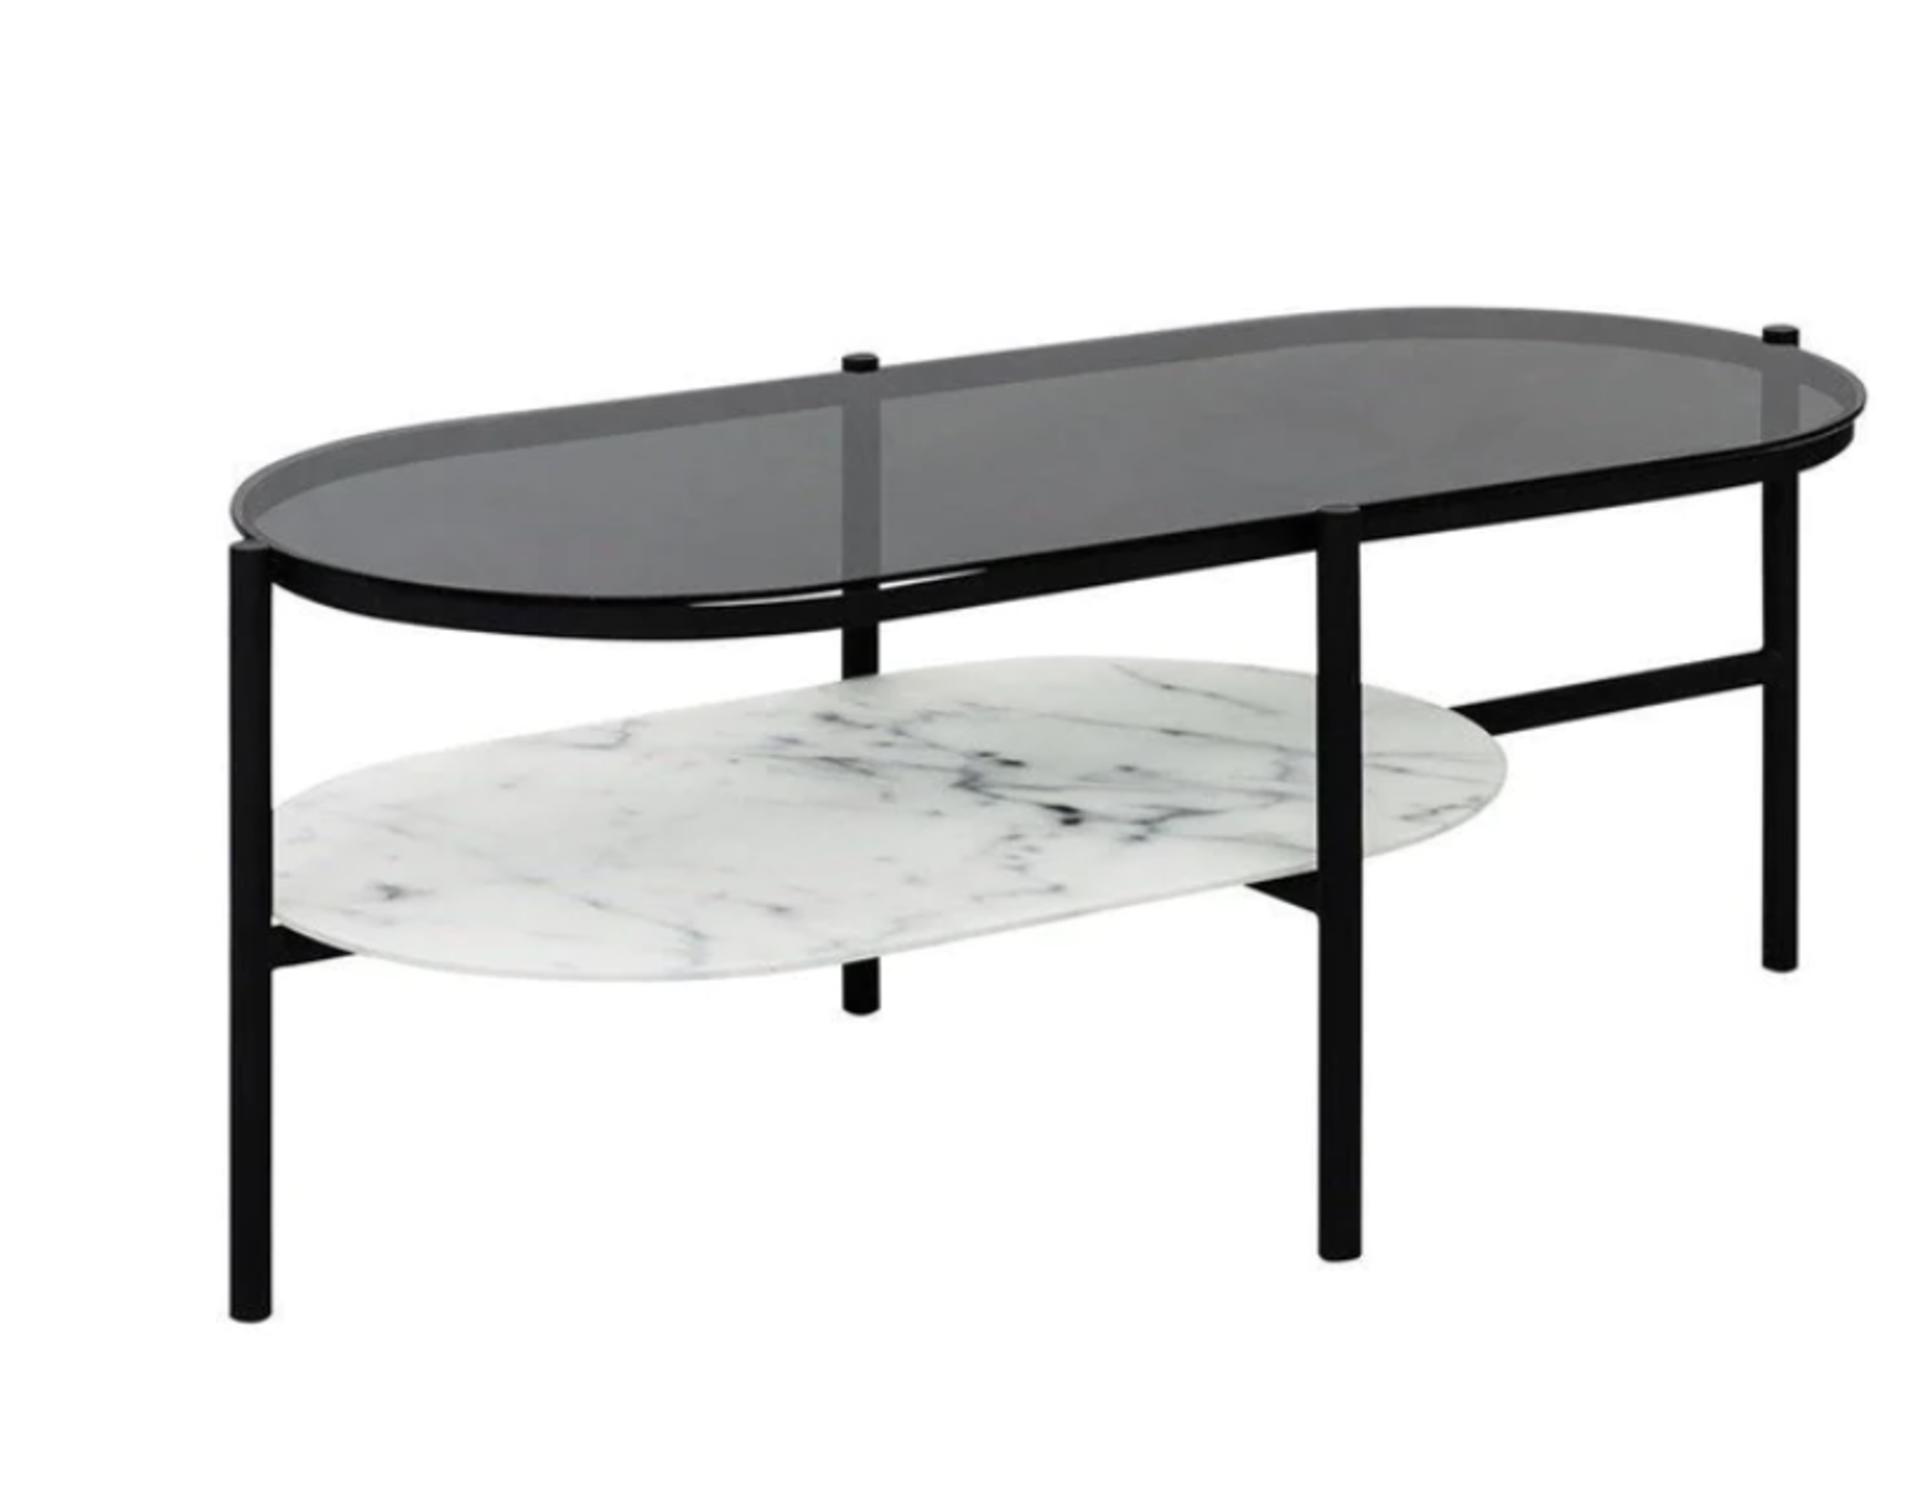 Striking Shildon Designer Coffee Table With Glass Top And Marble Shelf. RRP £295.00 - ROW5.